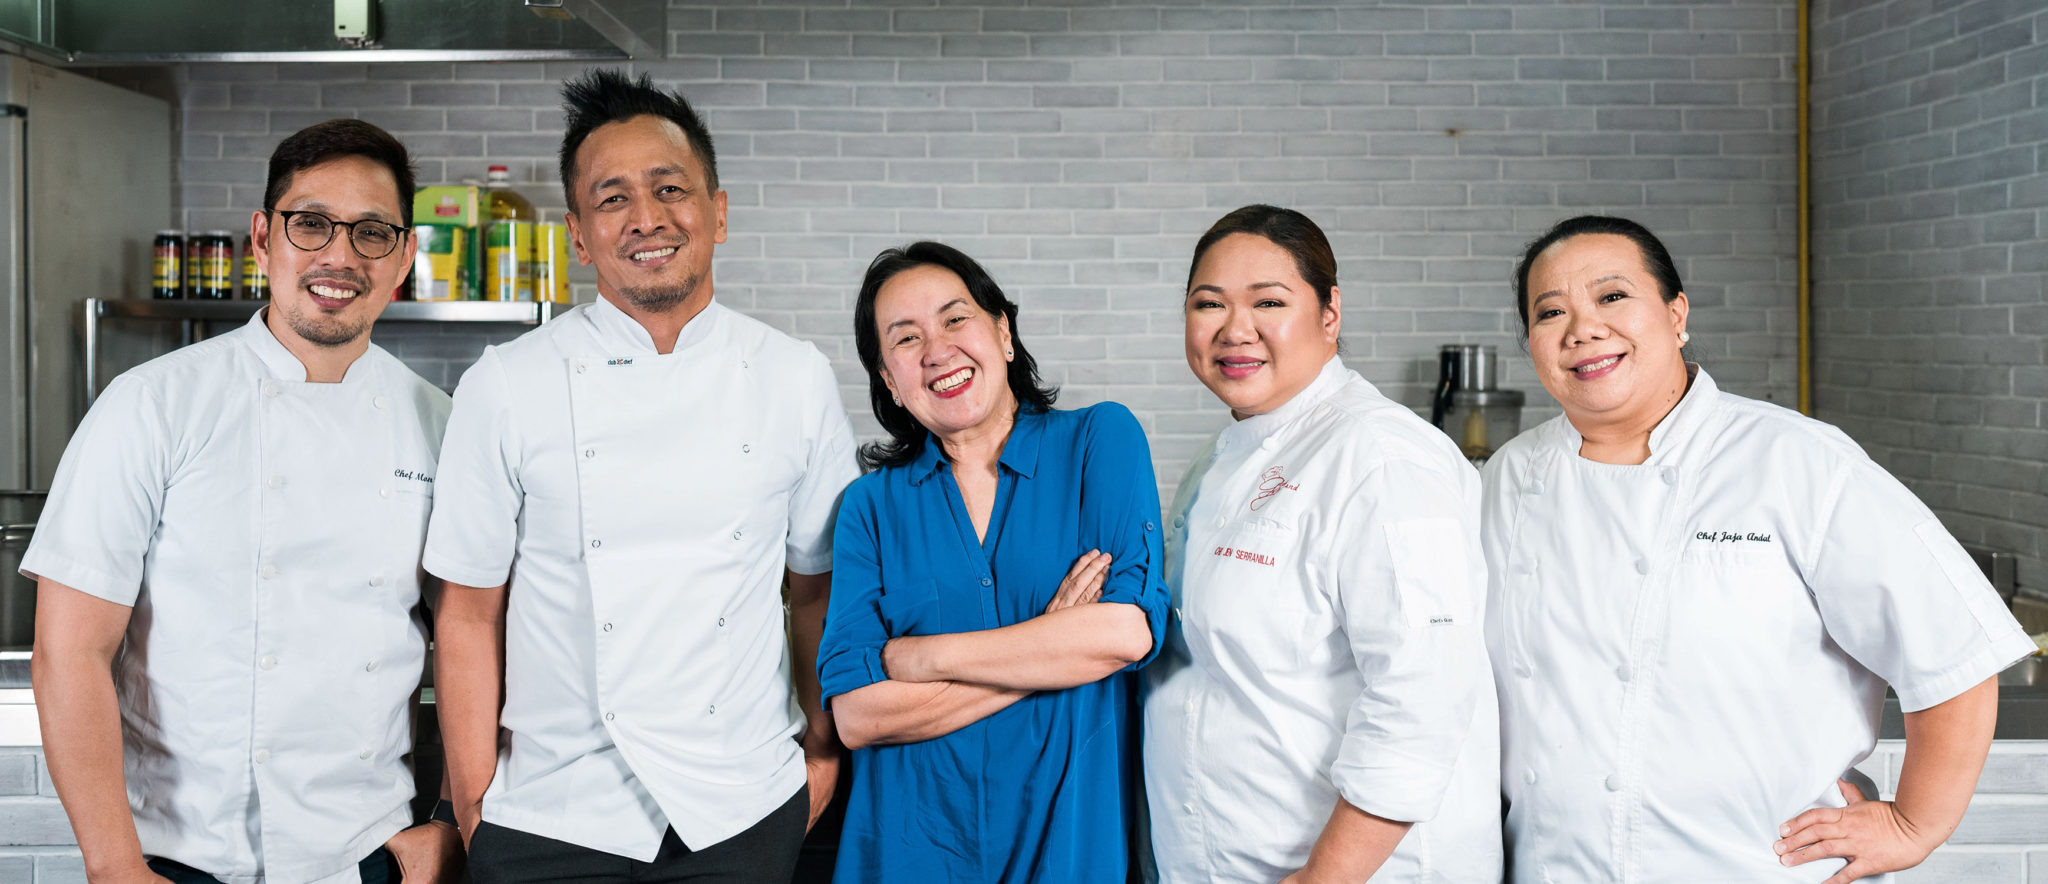 Solane Kitchen Hero Chefs’ Edition is the country’s first-ever regional cooking competition